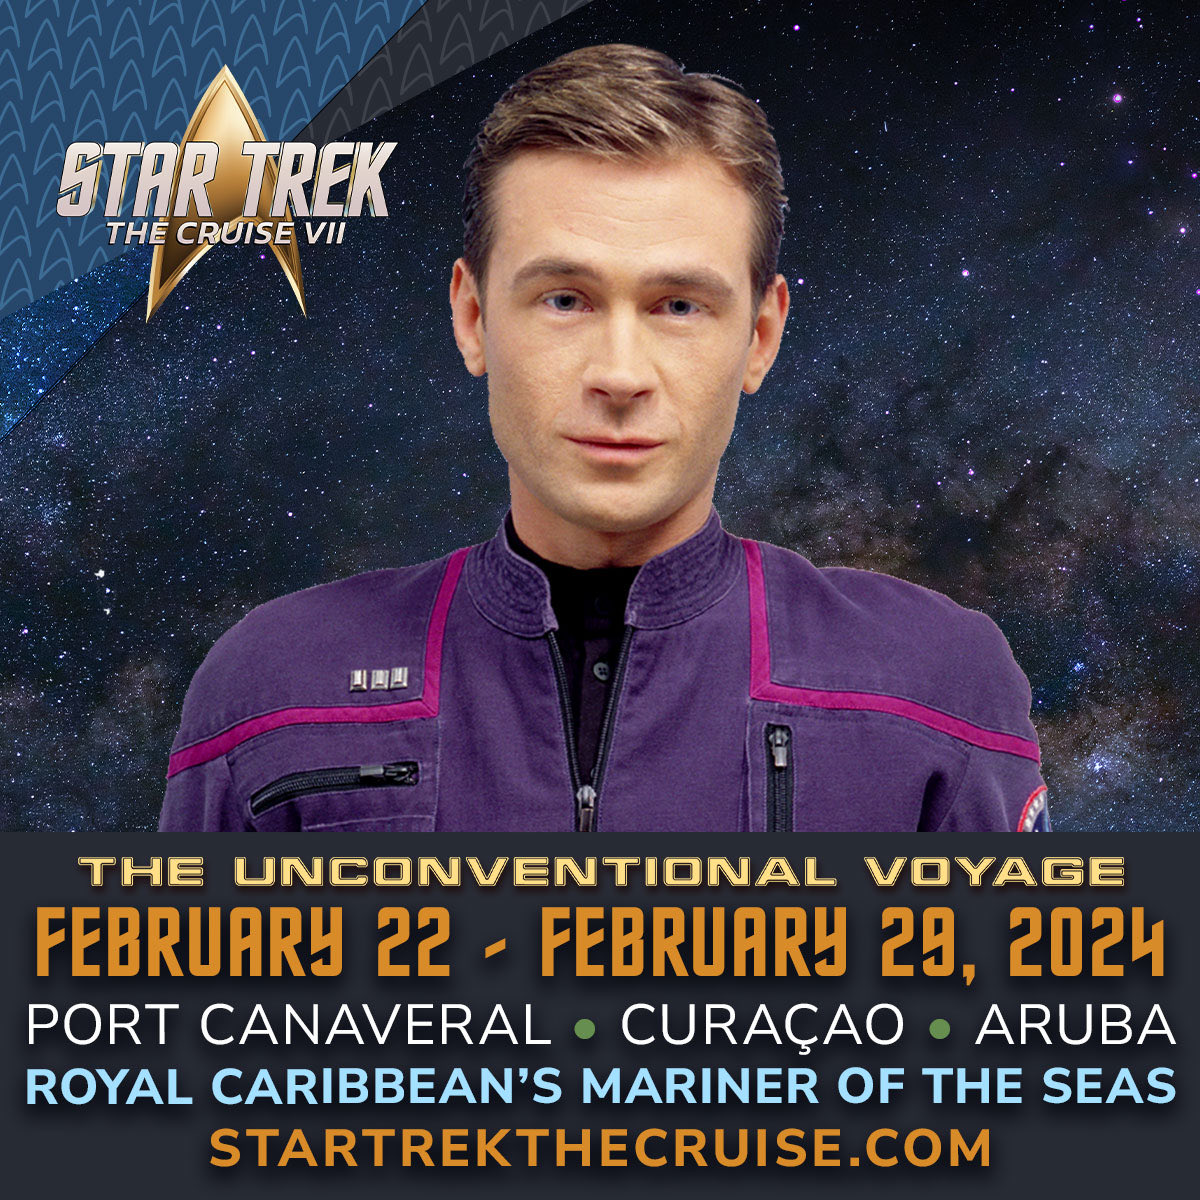 Hey Y’all! I’m sailing on @startrekcruise again in 2024 and I can’t wait! Check out the fantastic panels and great shows. Join me. We’ll have a blast! bit.ly/3CJrIdf